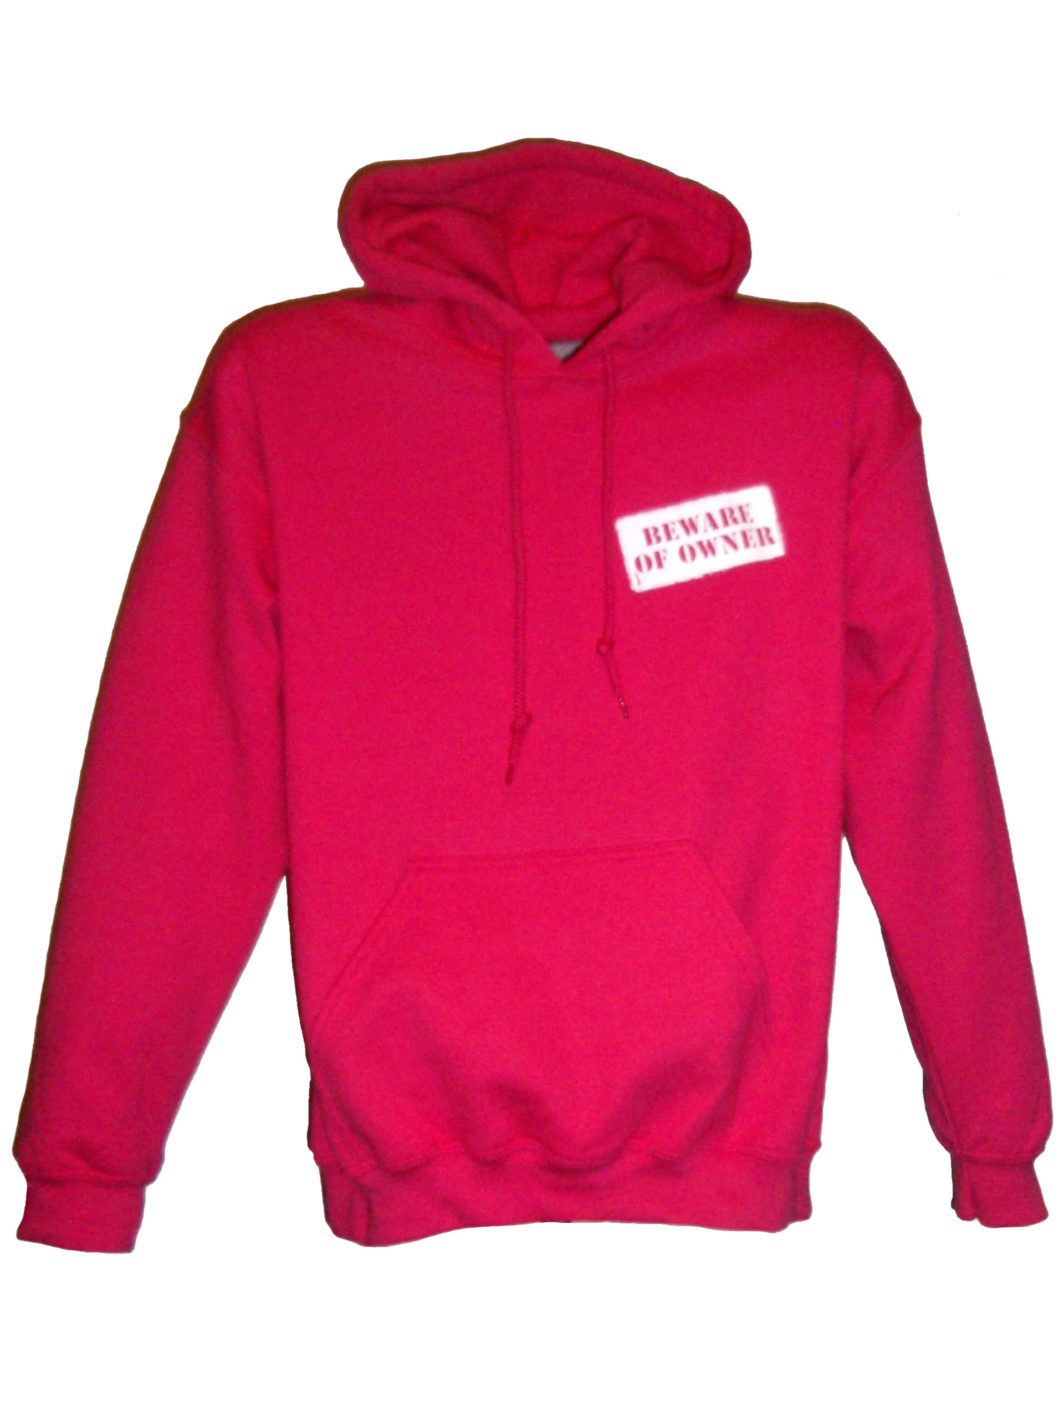 Dog Is Friendly Hoodie Pink Front